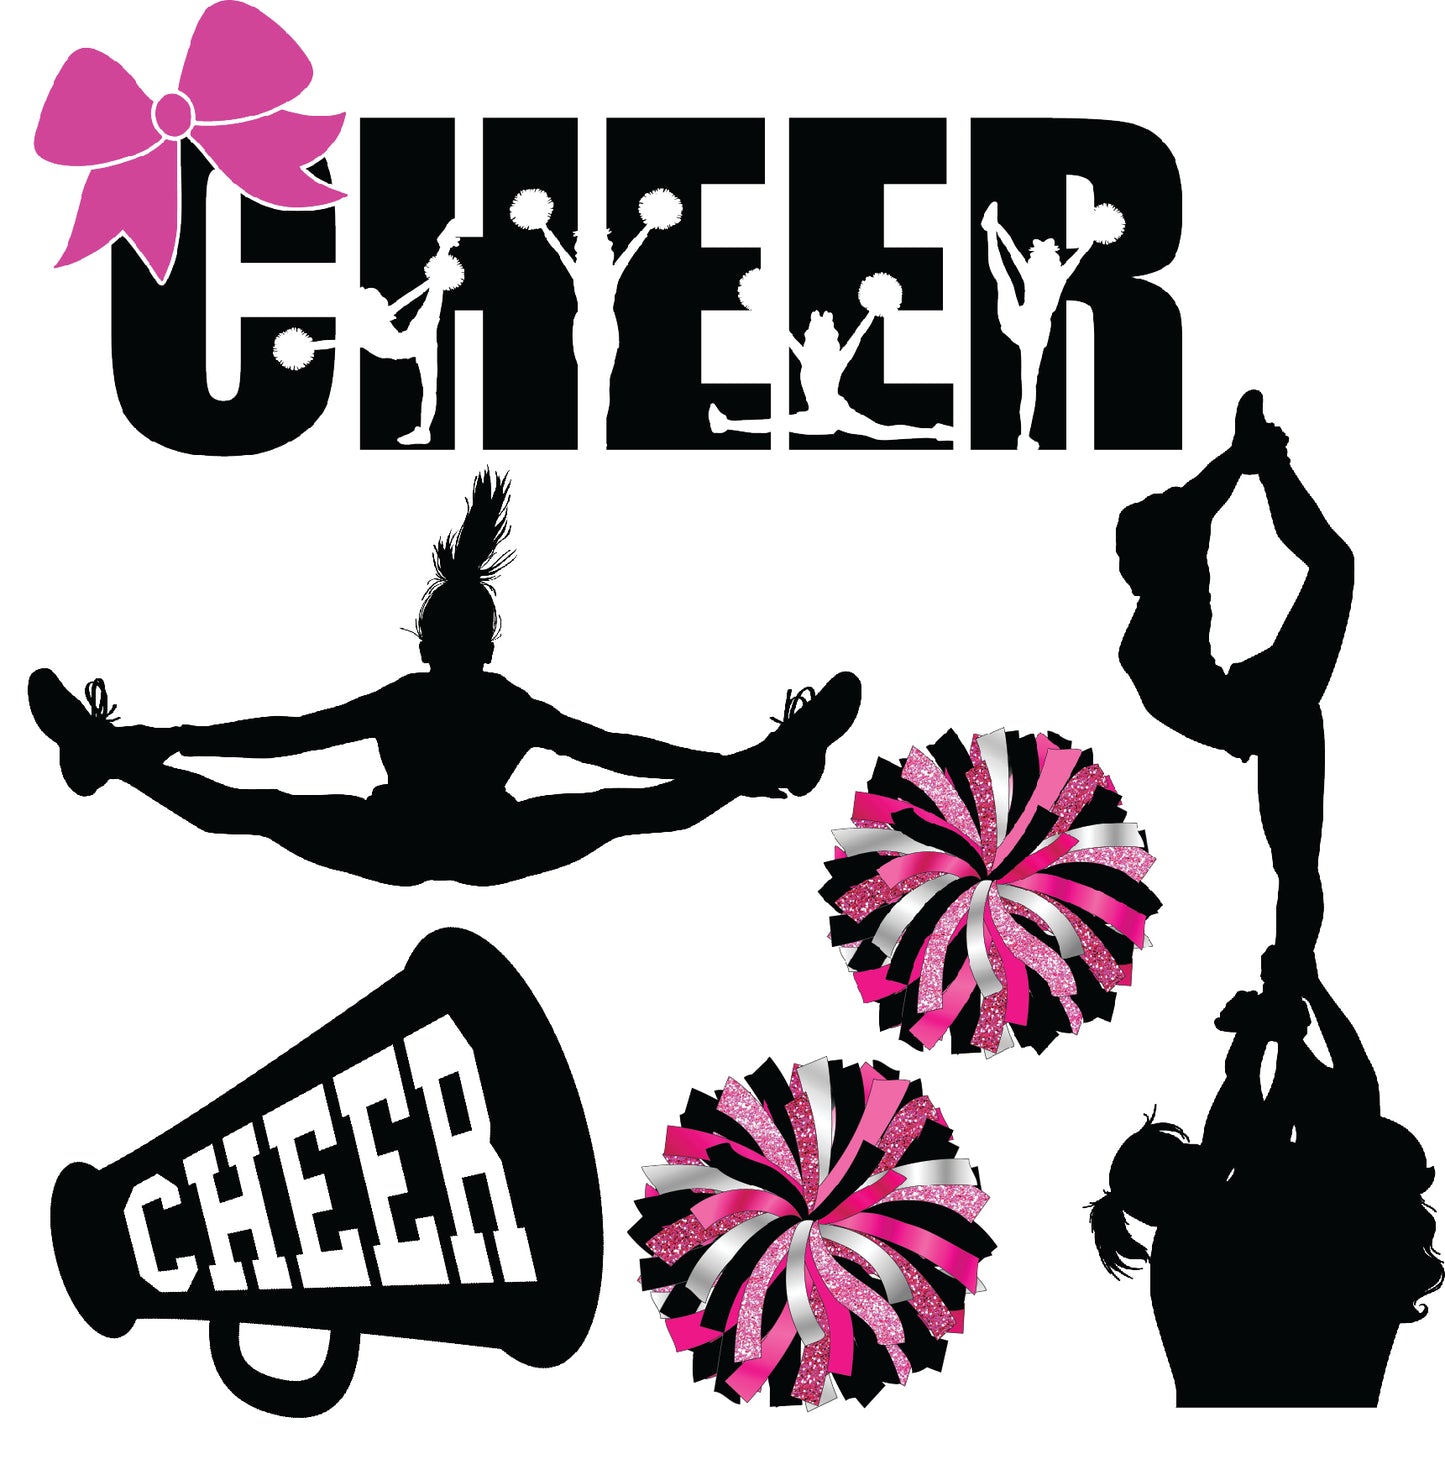 Cheerleading Set 3 - Half Sheet Misc. (Must Purchase 2 Half sheets - You Can Mix & Match)